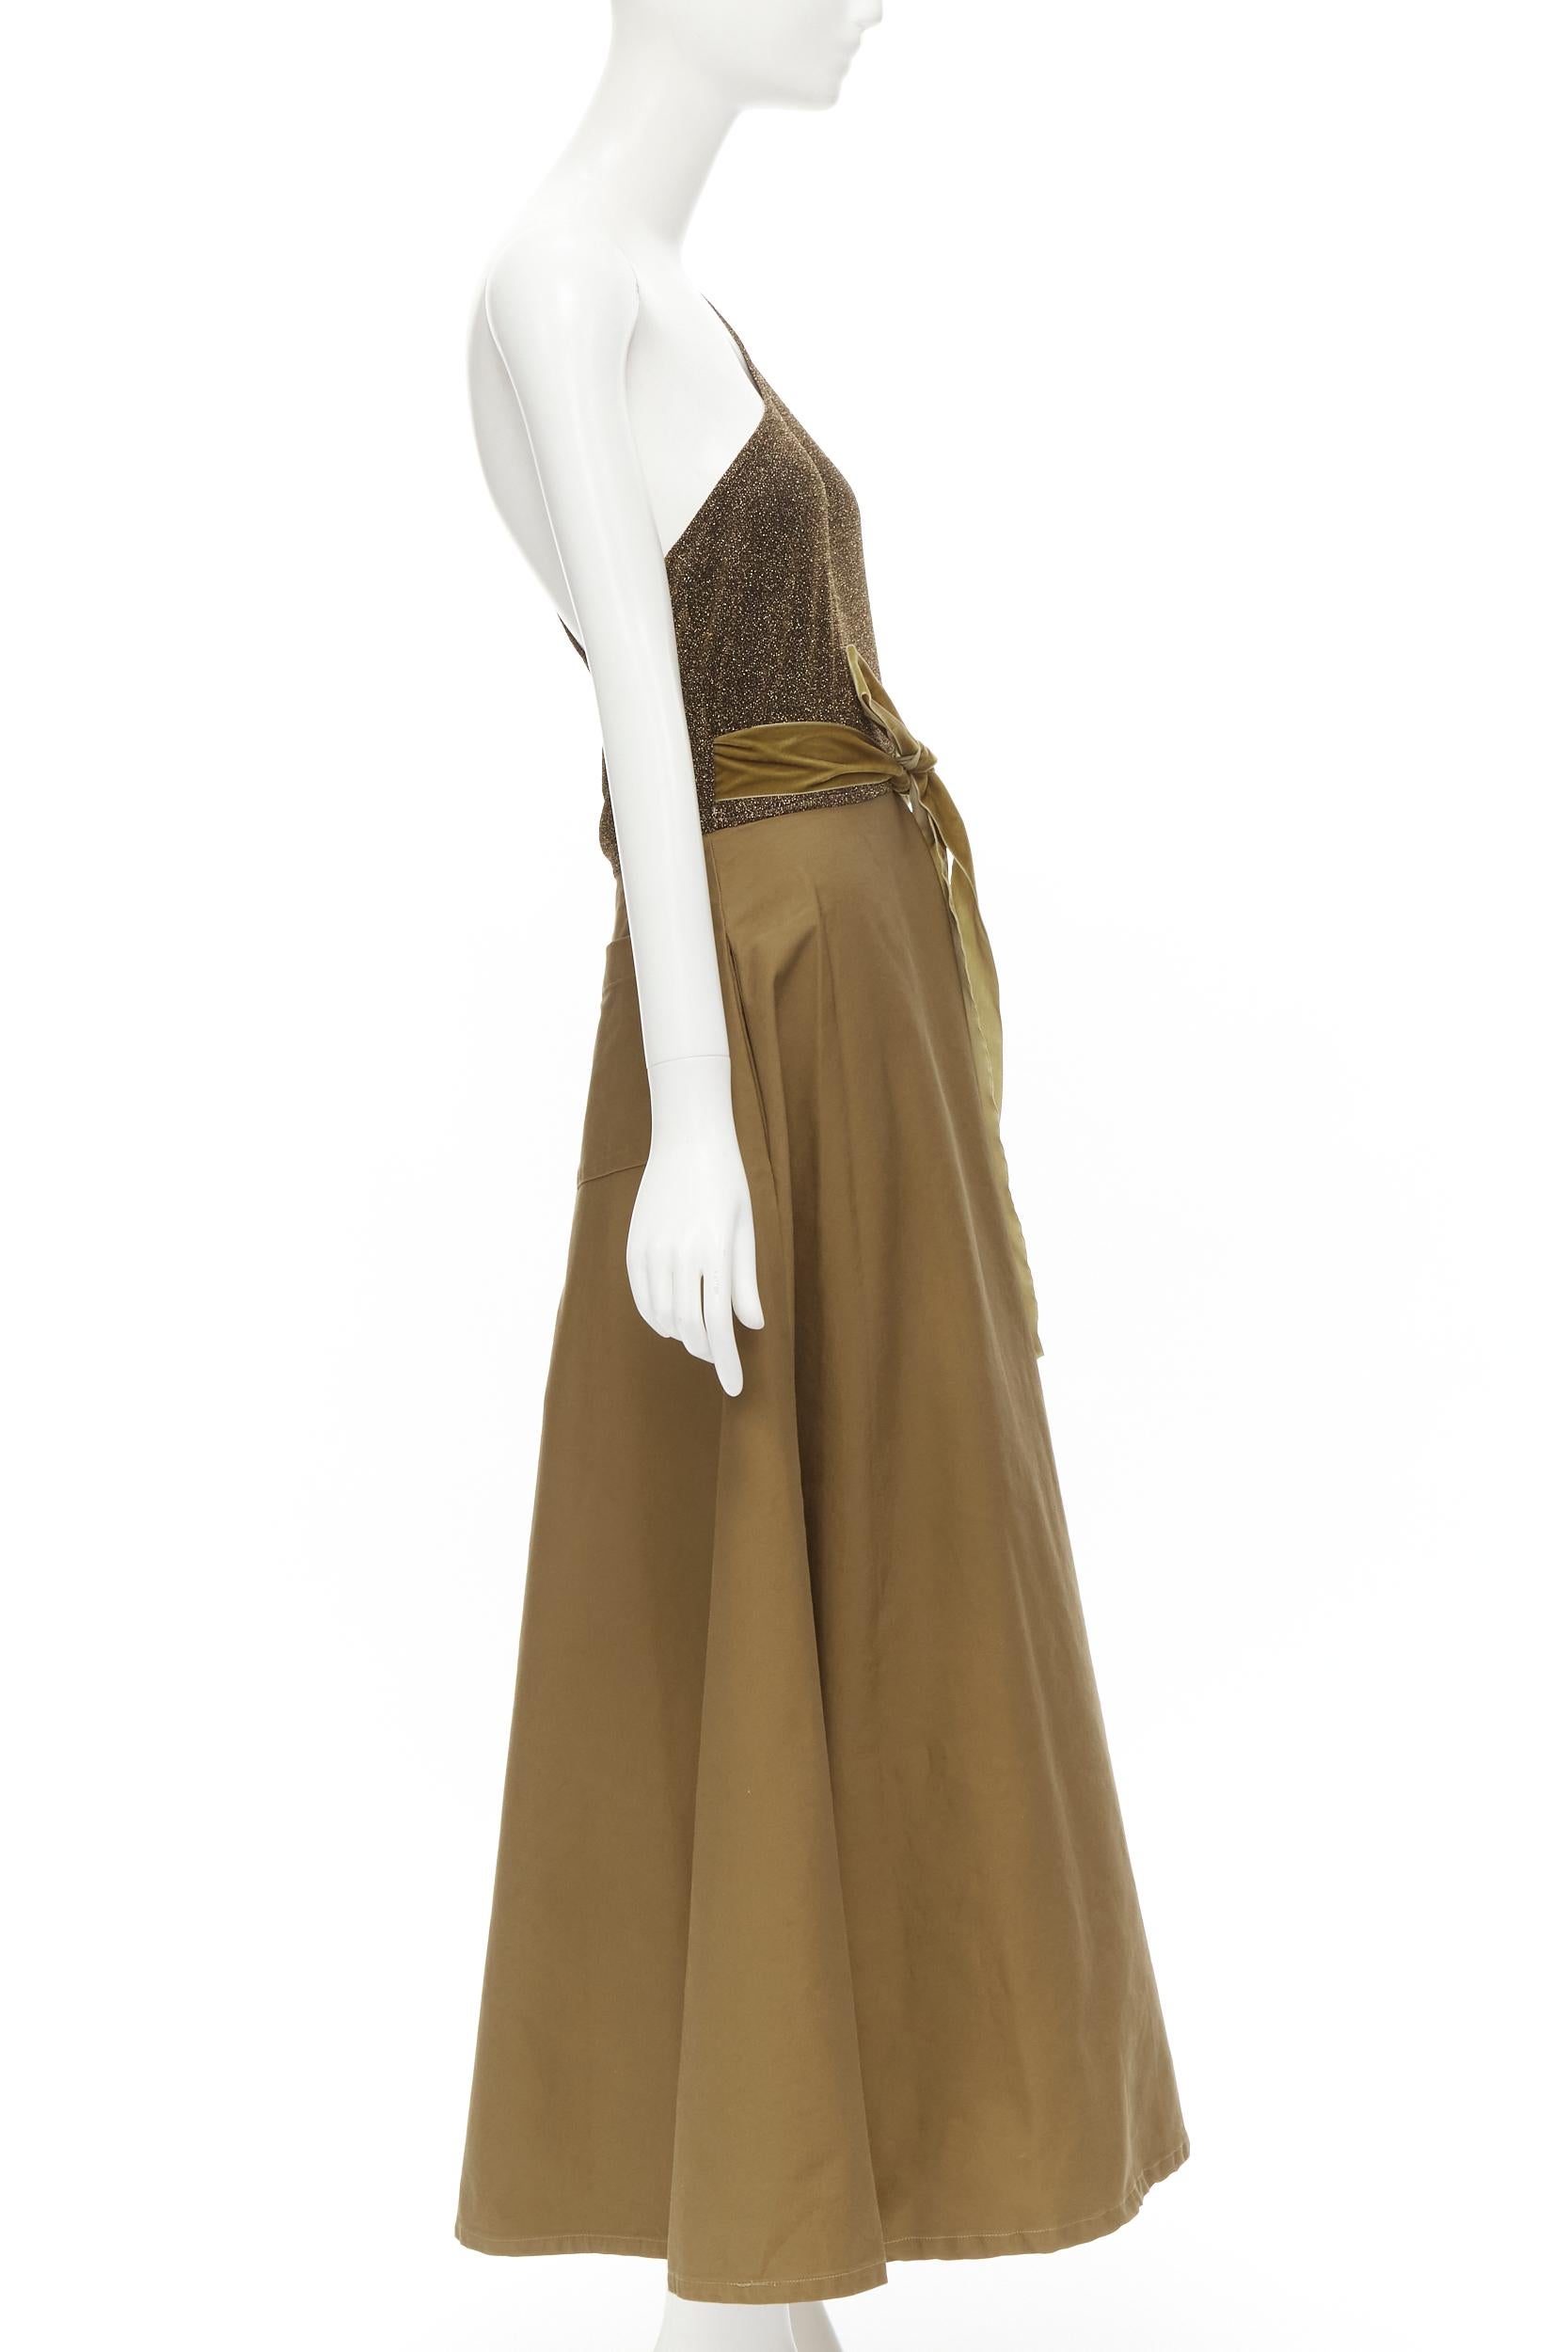 ARTCLUB Casa Miller gold lurex brown cotton twill wrap maxi dress M In Excellent Condition For Sale In Hong Kong, NT